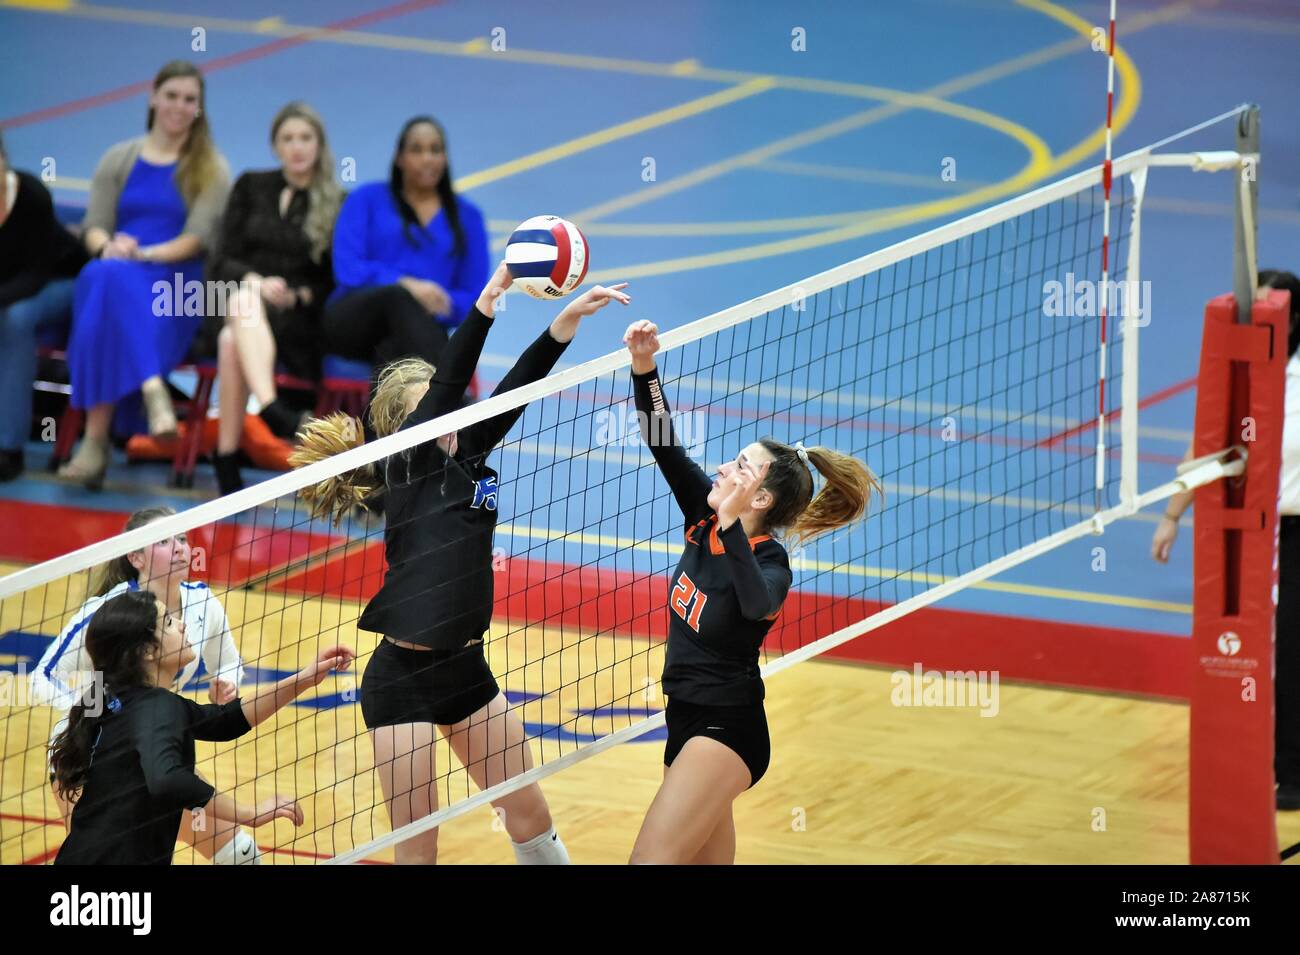 Player attempting to deliver a kill shot past an opponent trying to block the effort. USA. Stock Photo